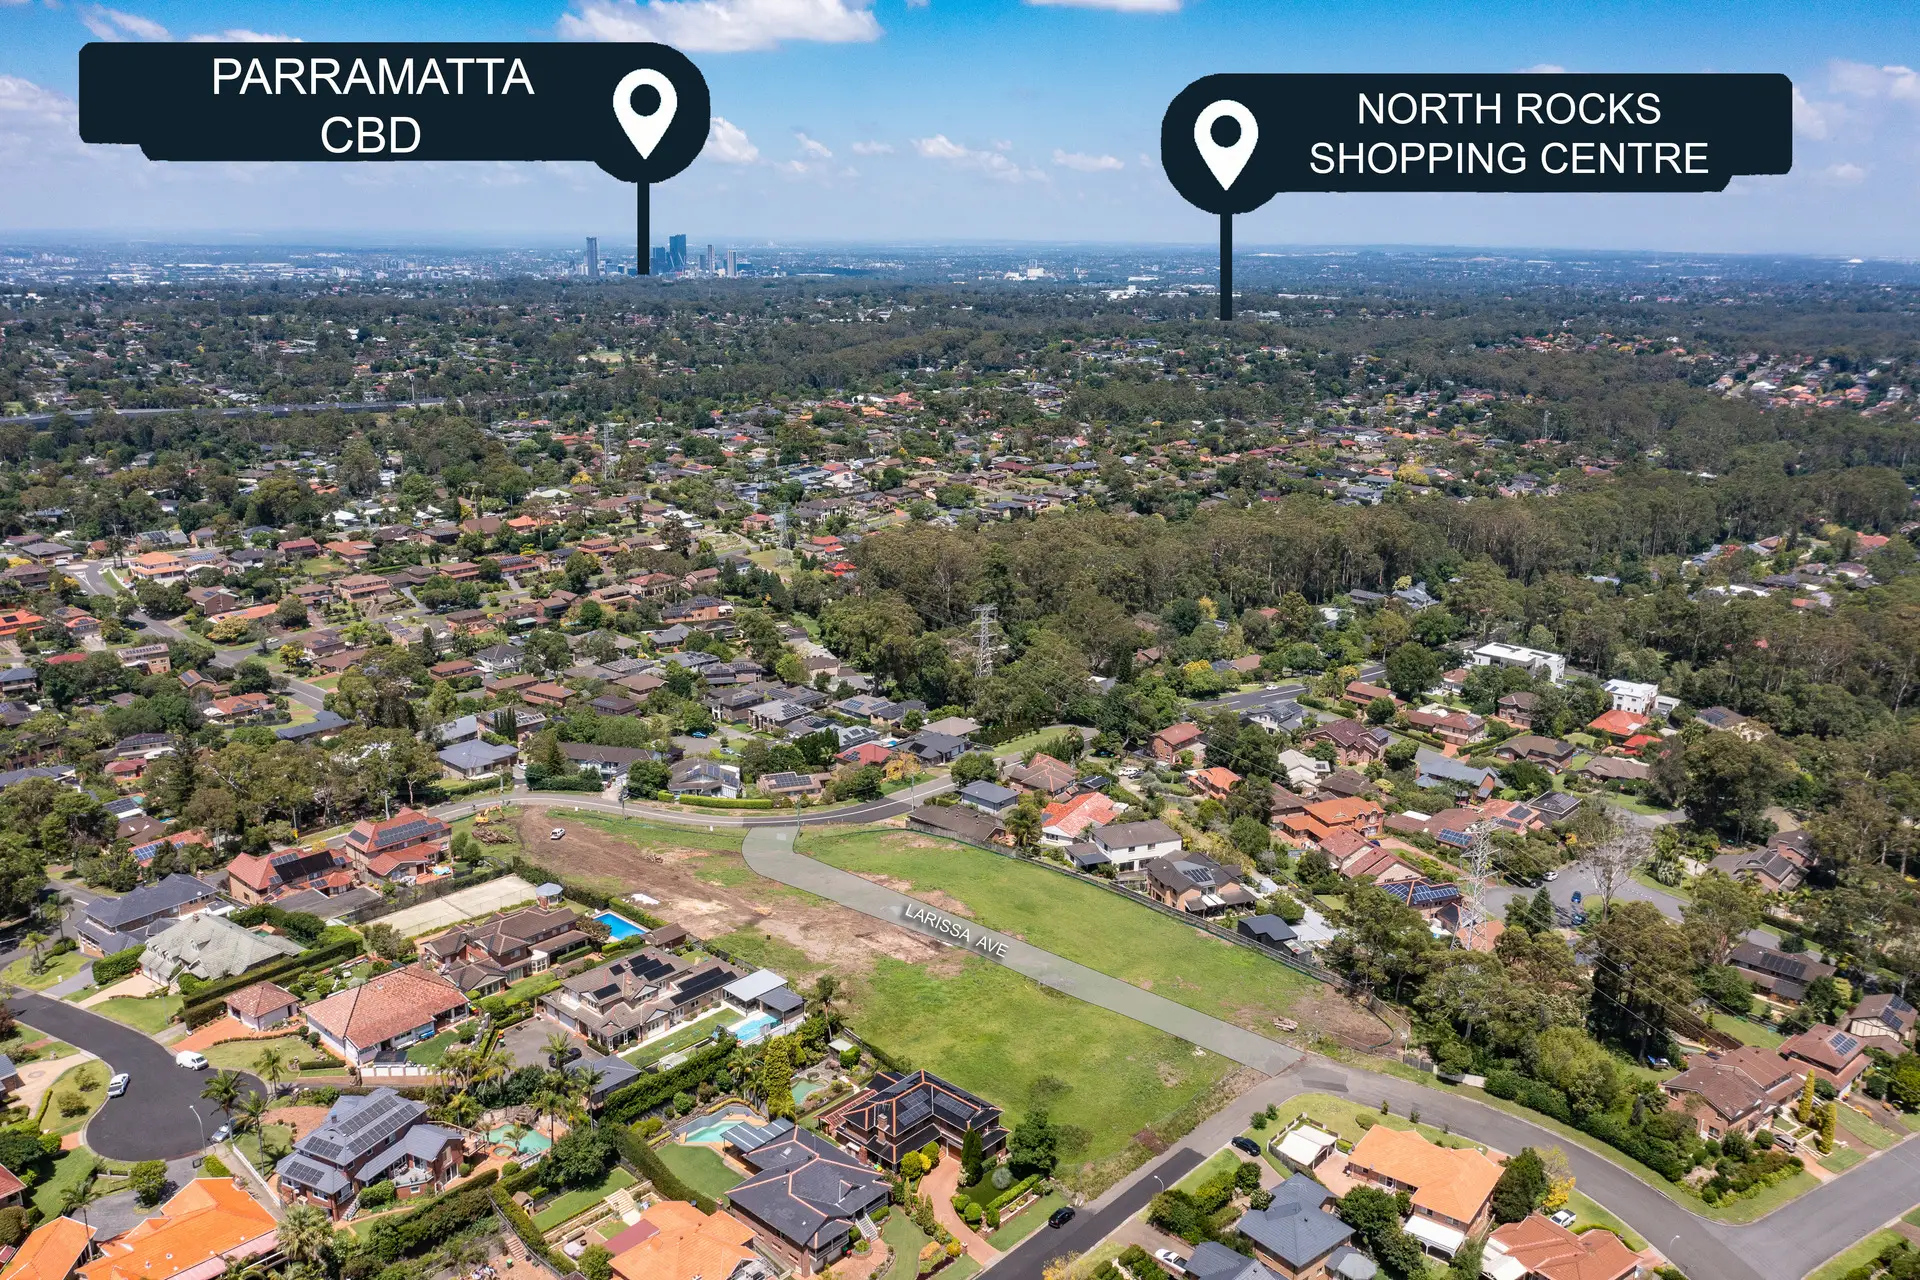 Photo #1: Lot 14, 79-87 Oratava Avenue, West Pennant Hills - For Sale by Louis Carr Real Estate